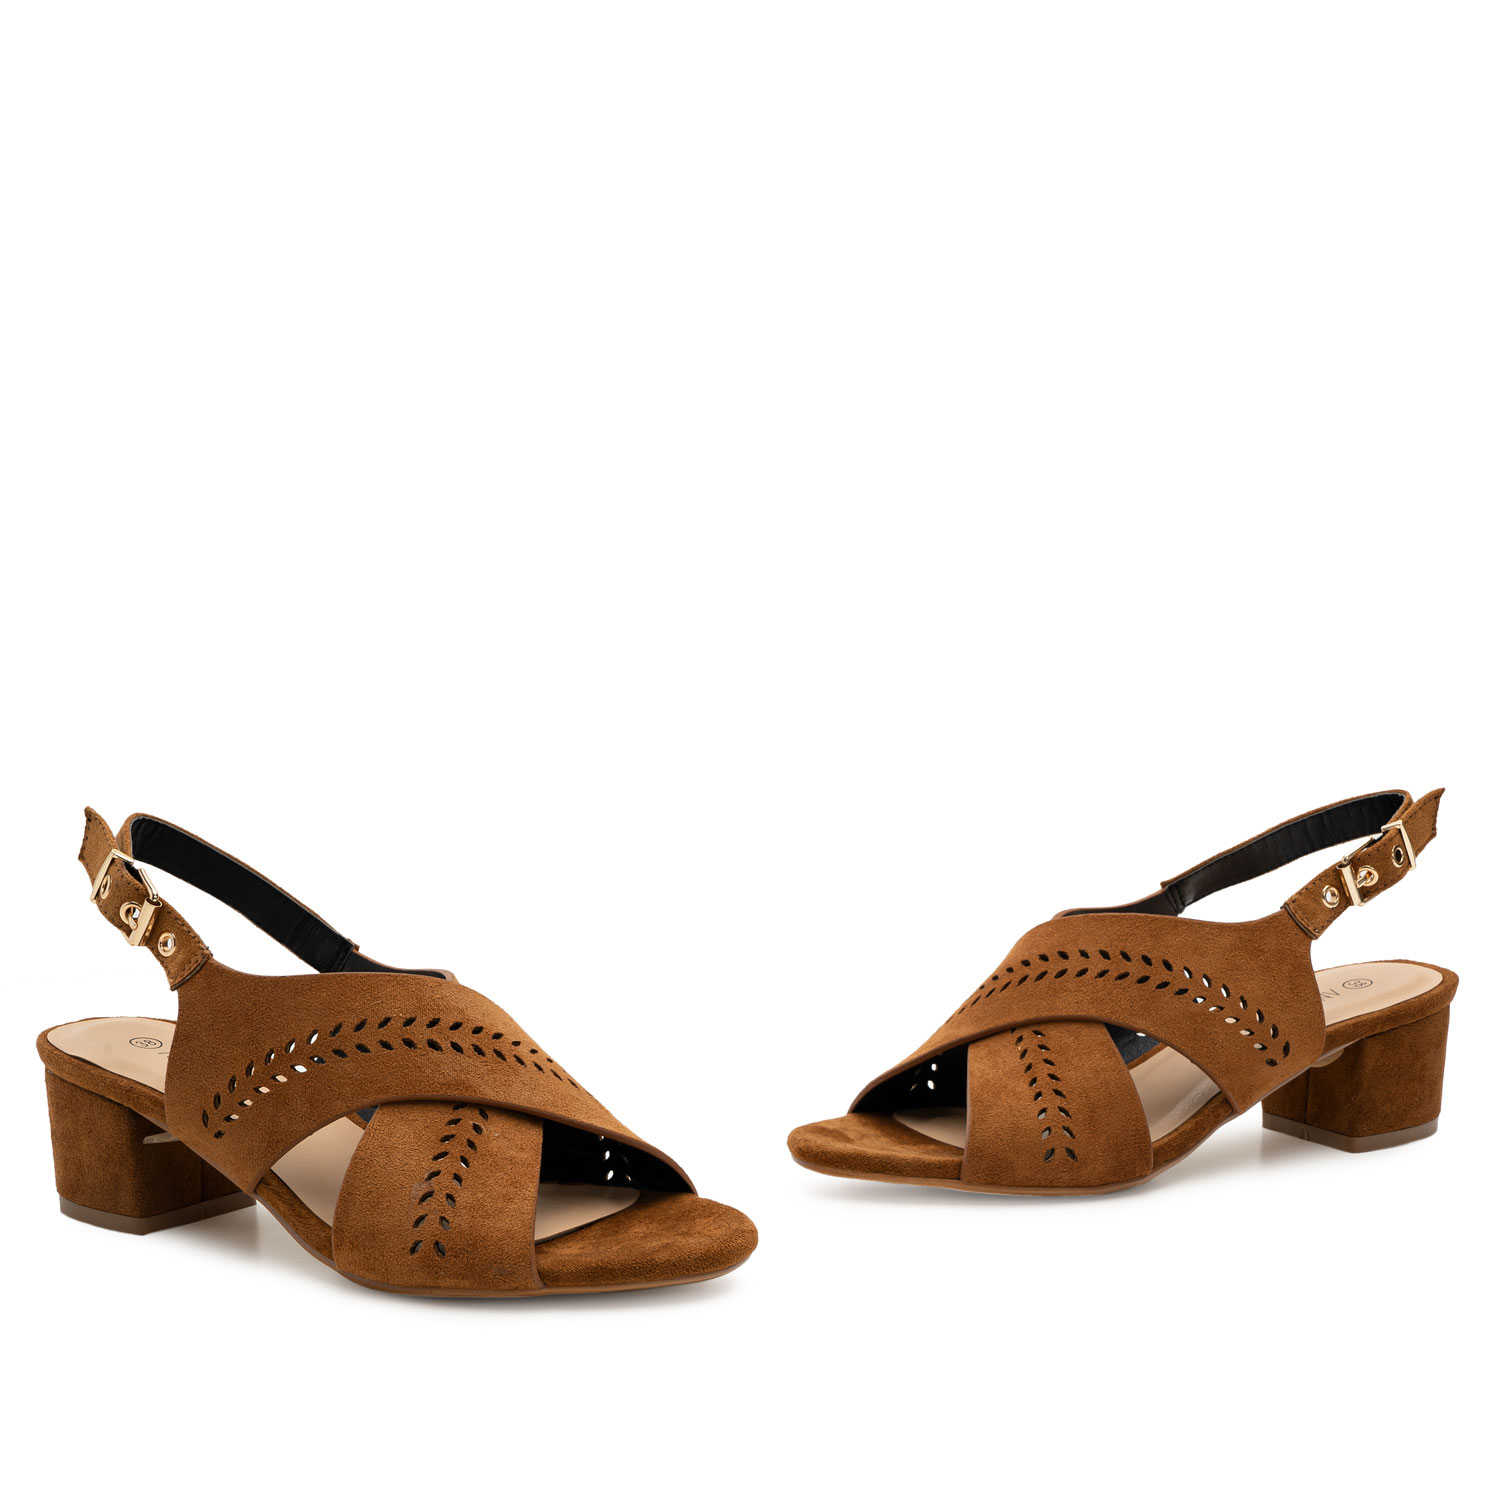 Camel Embossed Faux Leather Sandals 